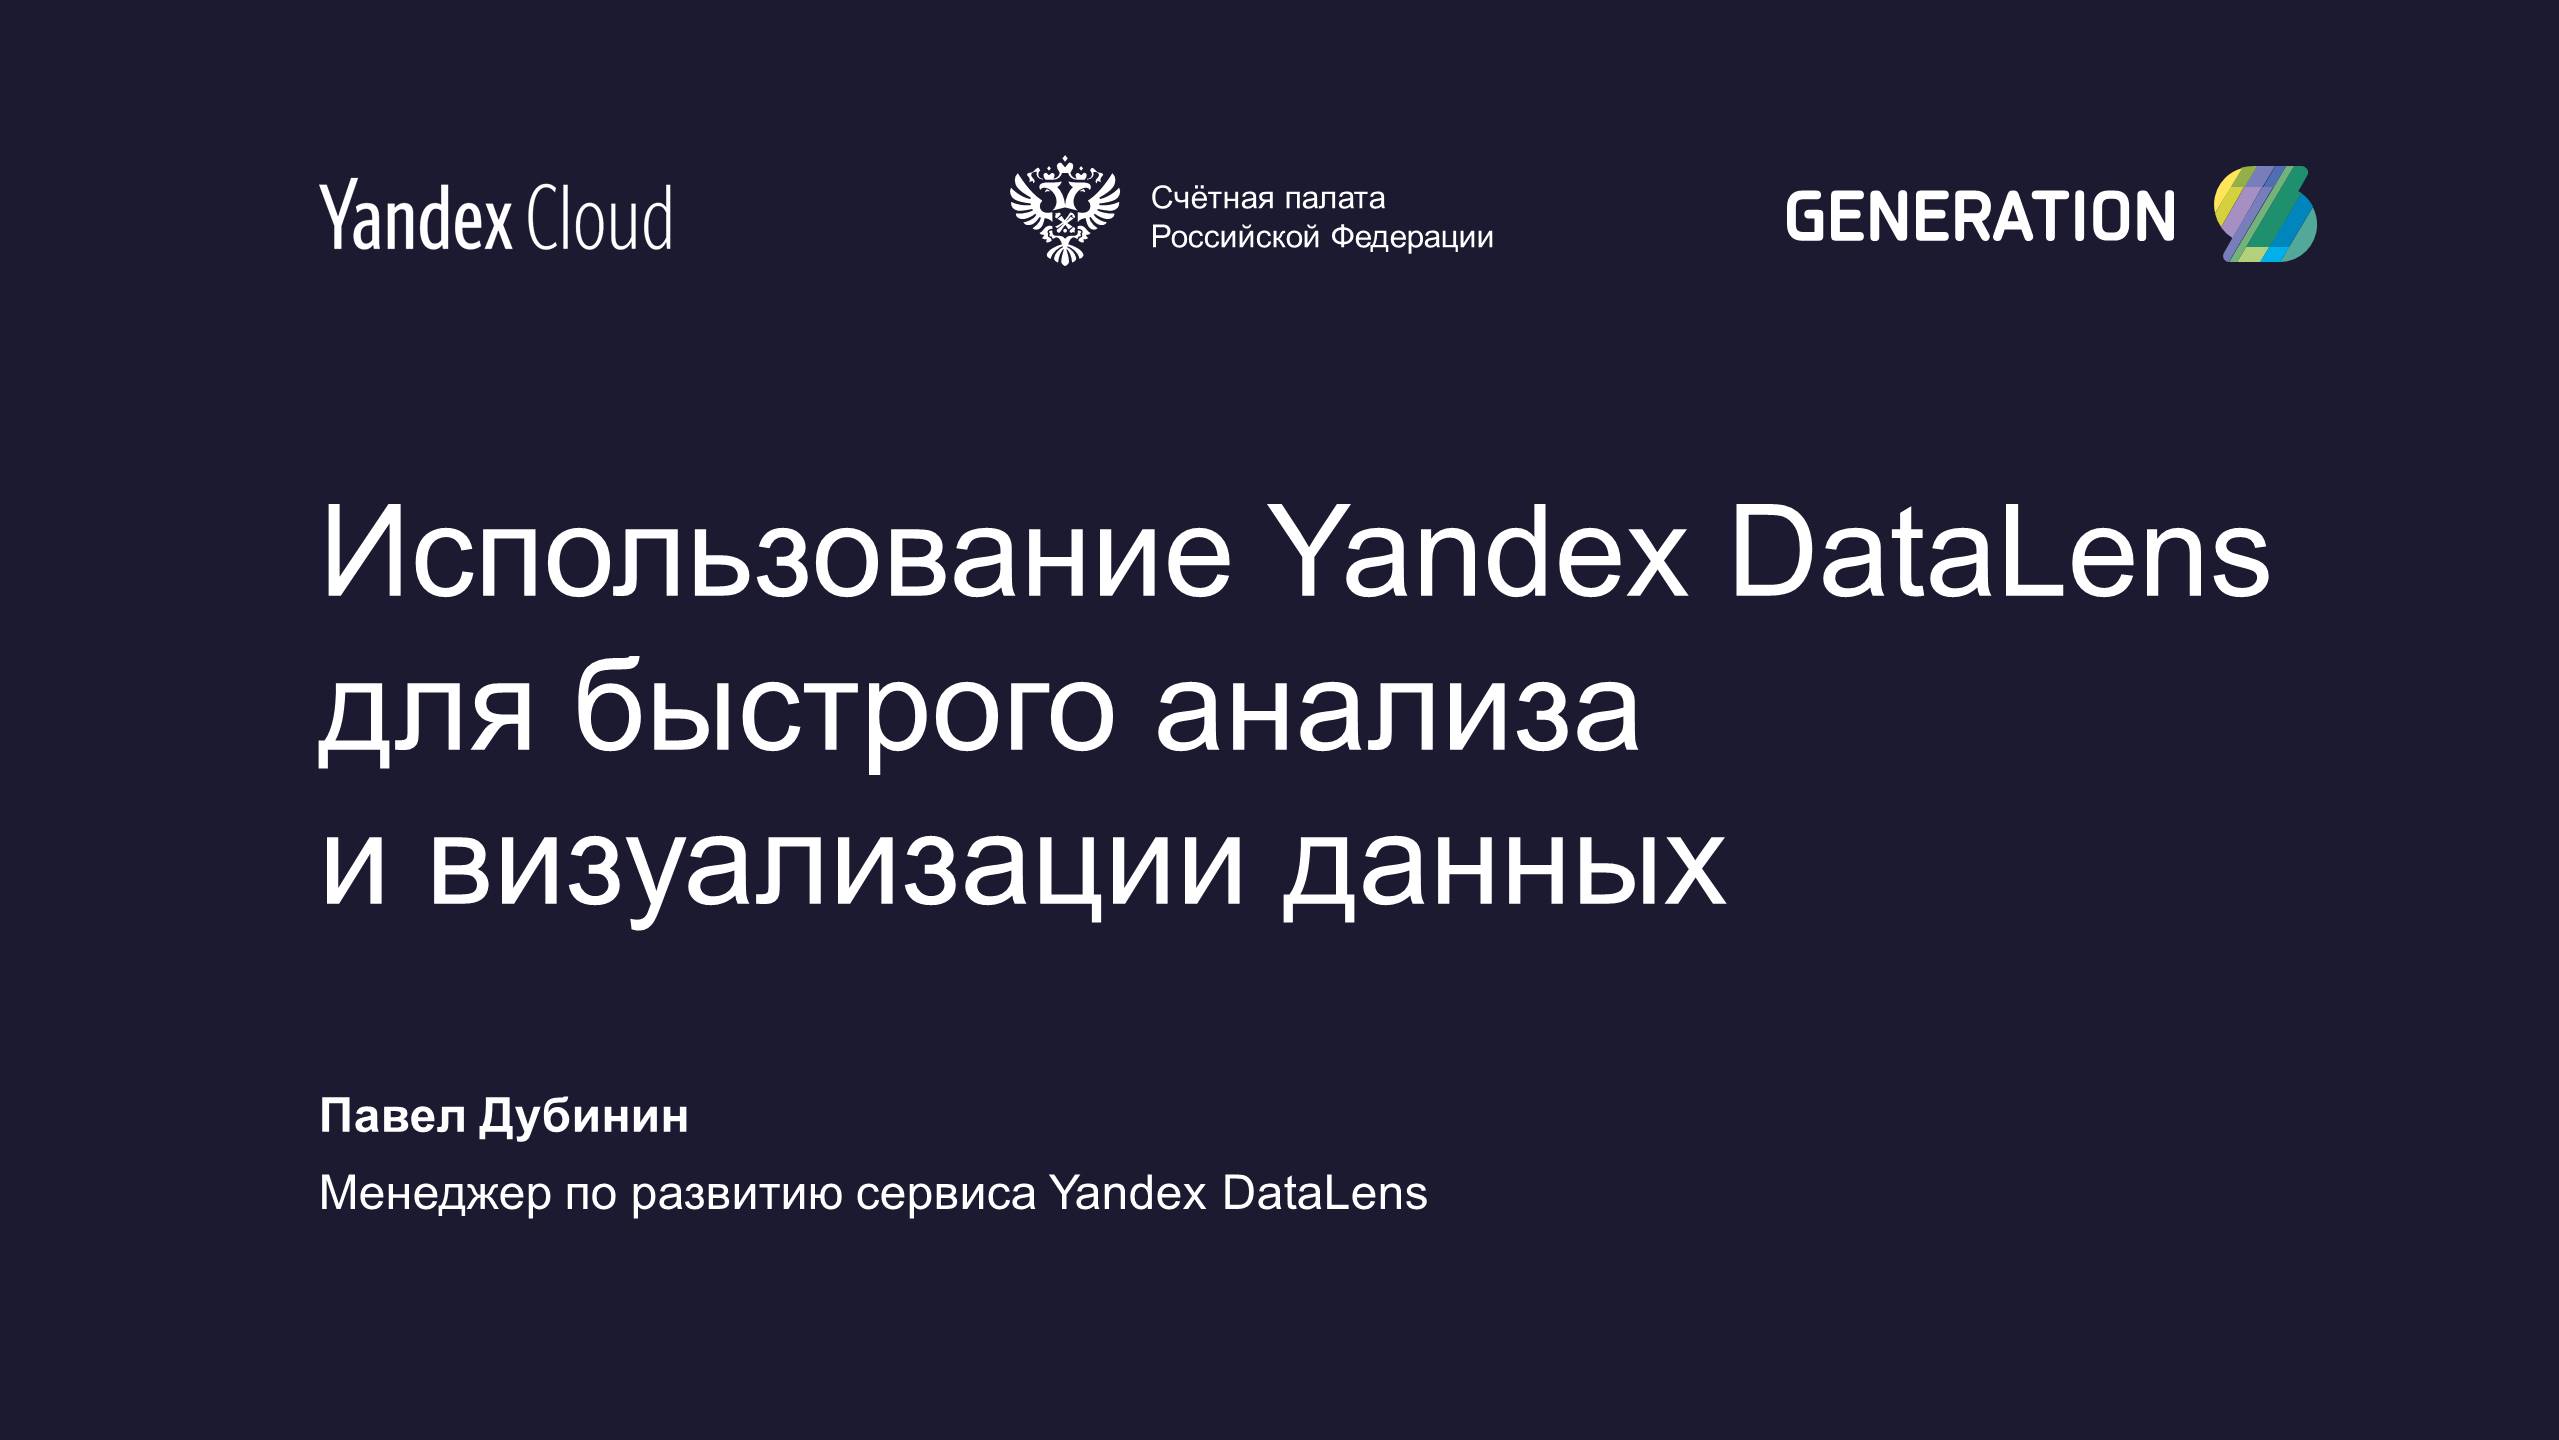 How to use Yandex DataLens for court cases